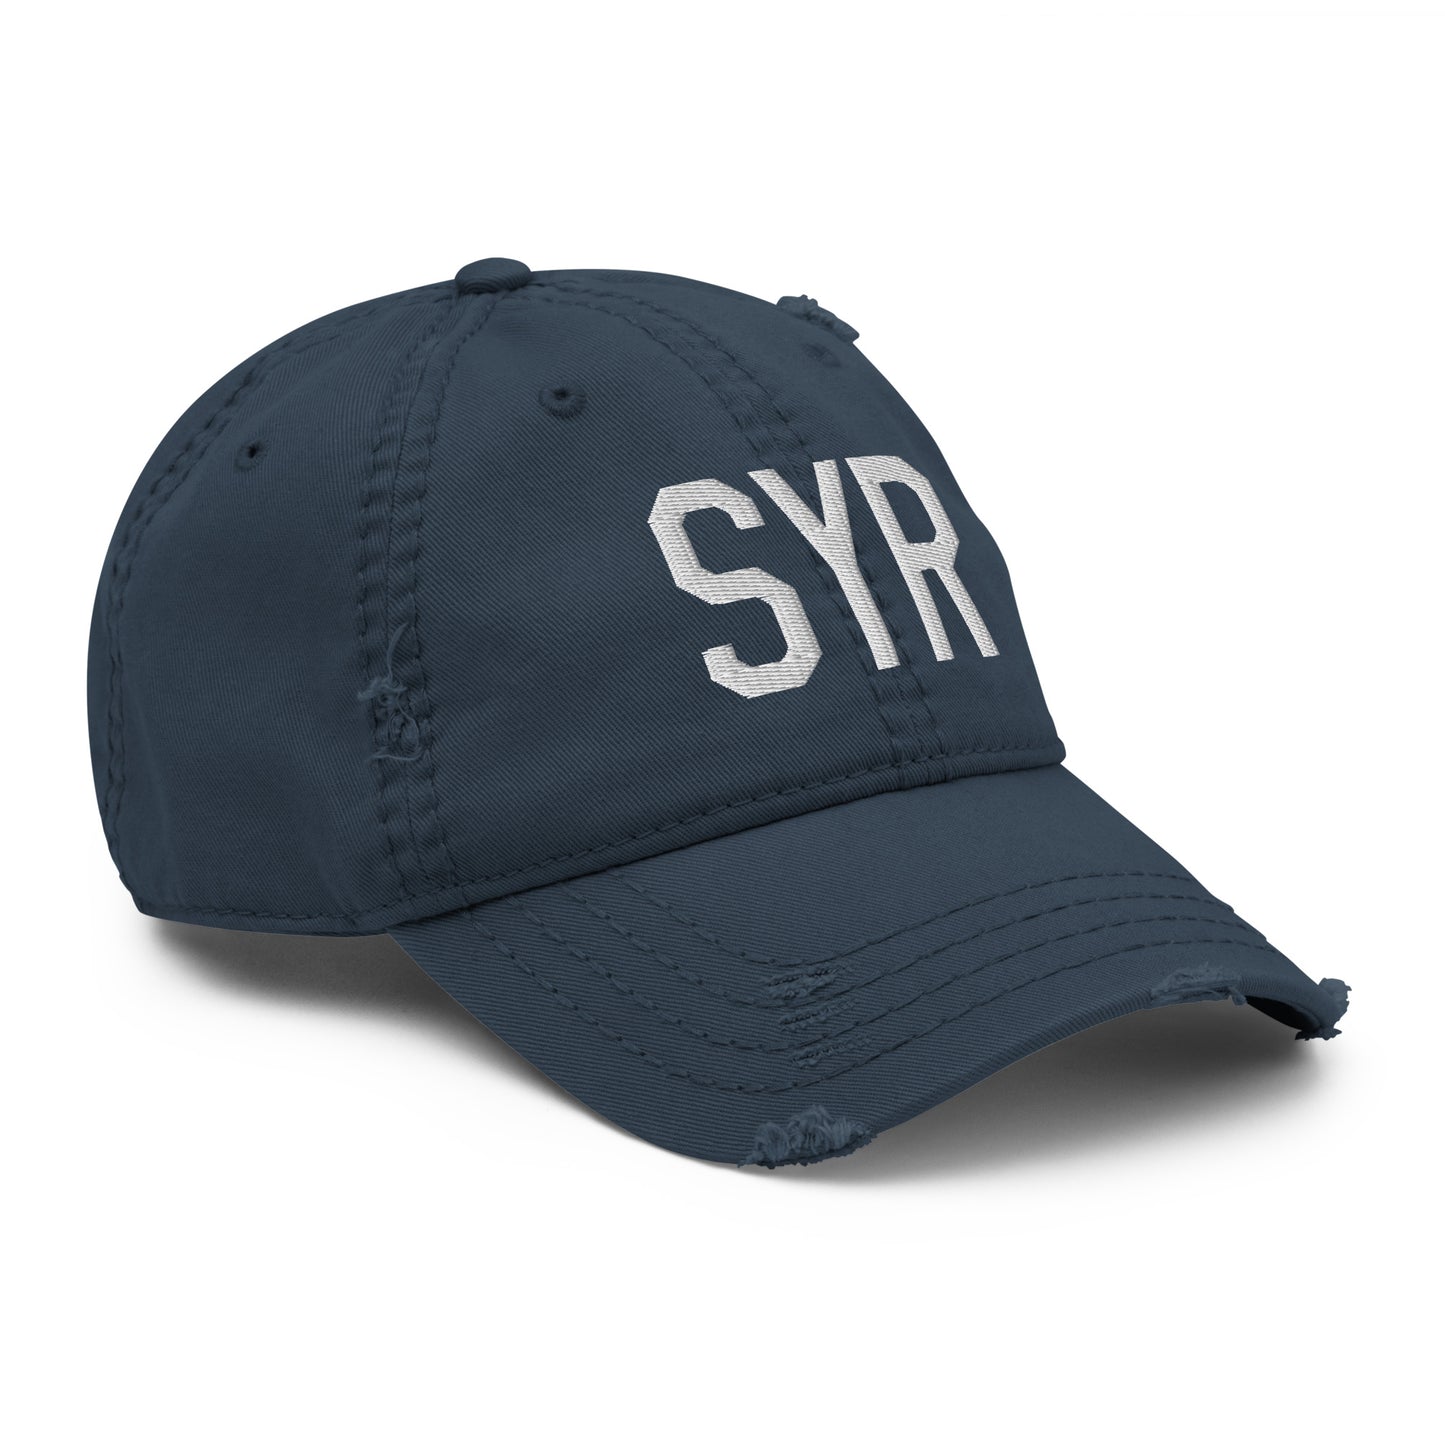 Airport Code Distressed Hat - White • SYR Syracuse • YHM Designs - Image 14